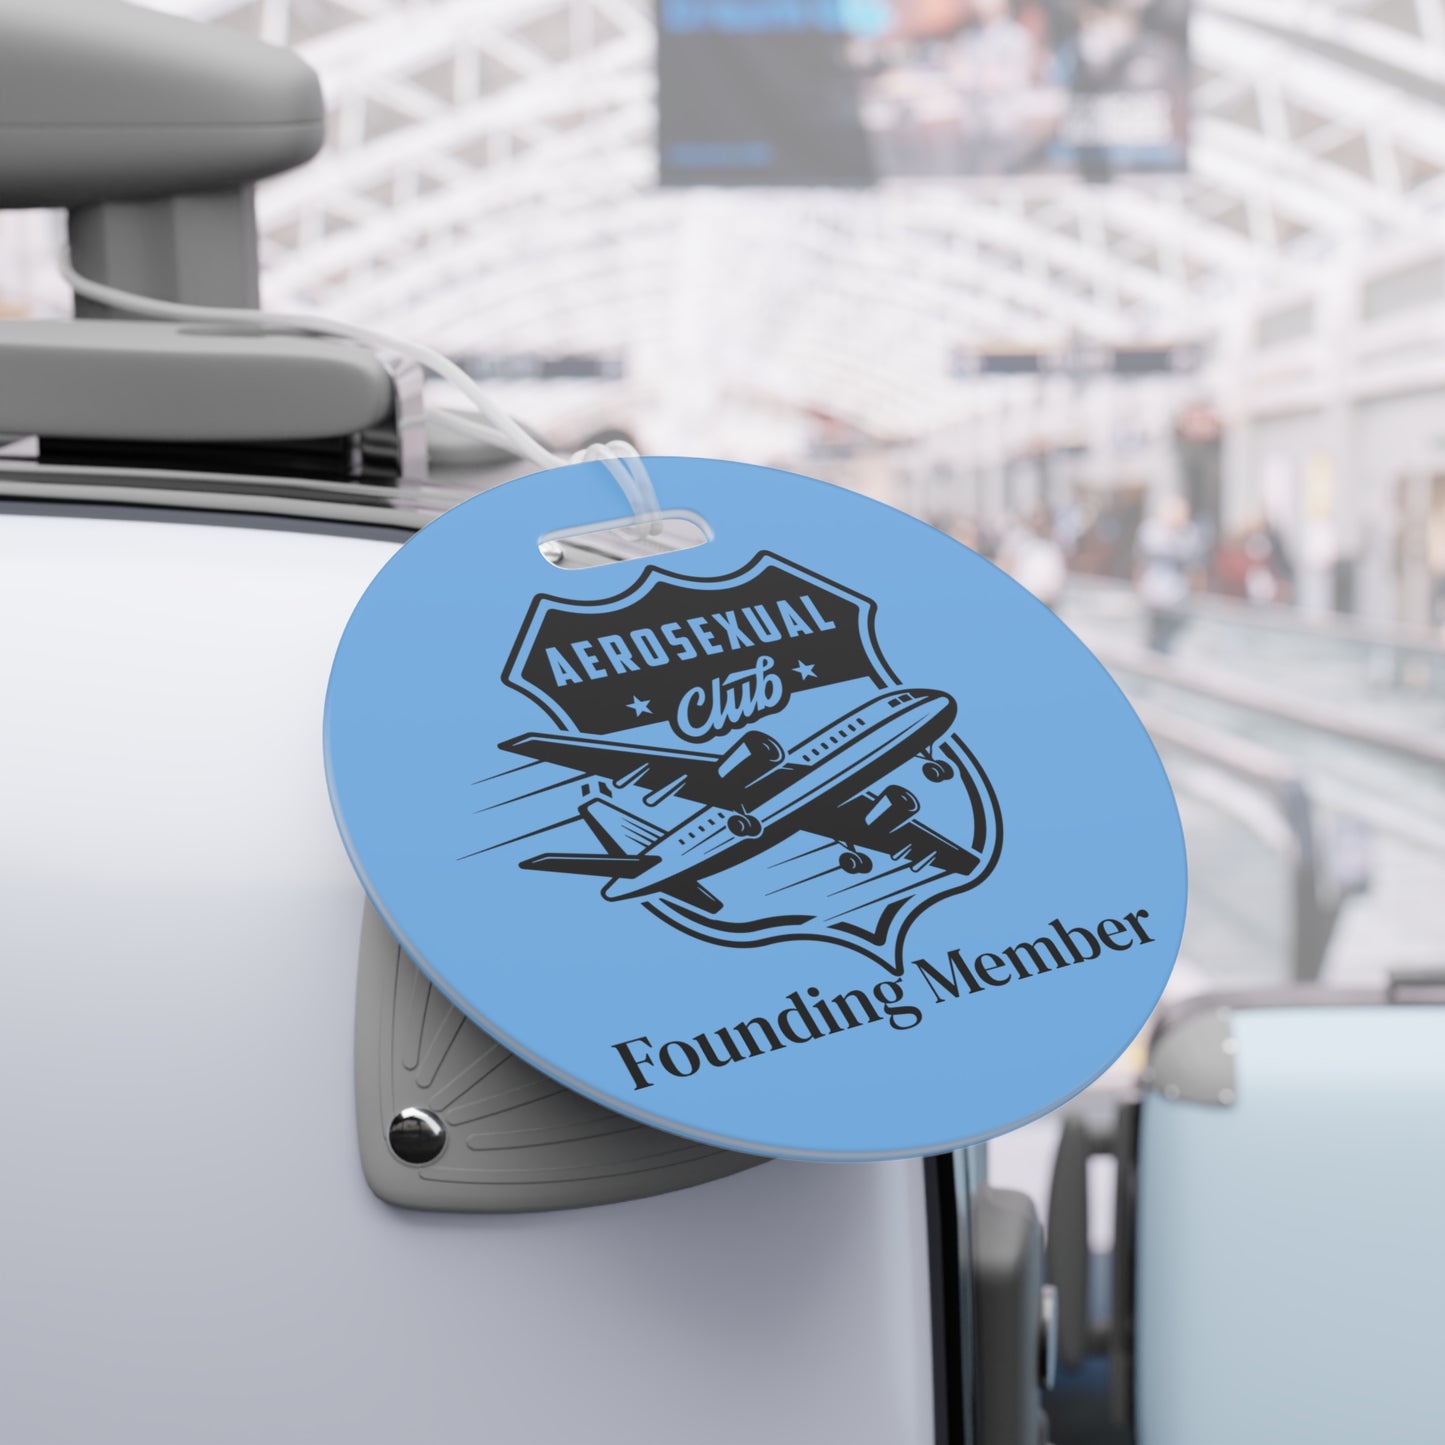 Aerosexual Club Founding Member Luggage Tag Light Blue (Limited Edition)